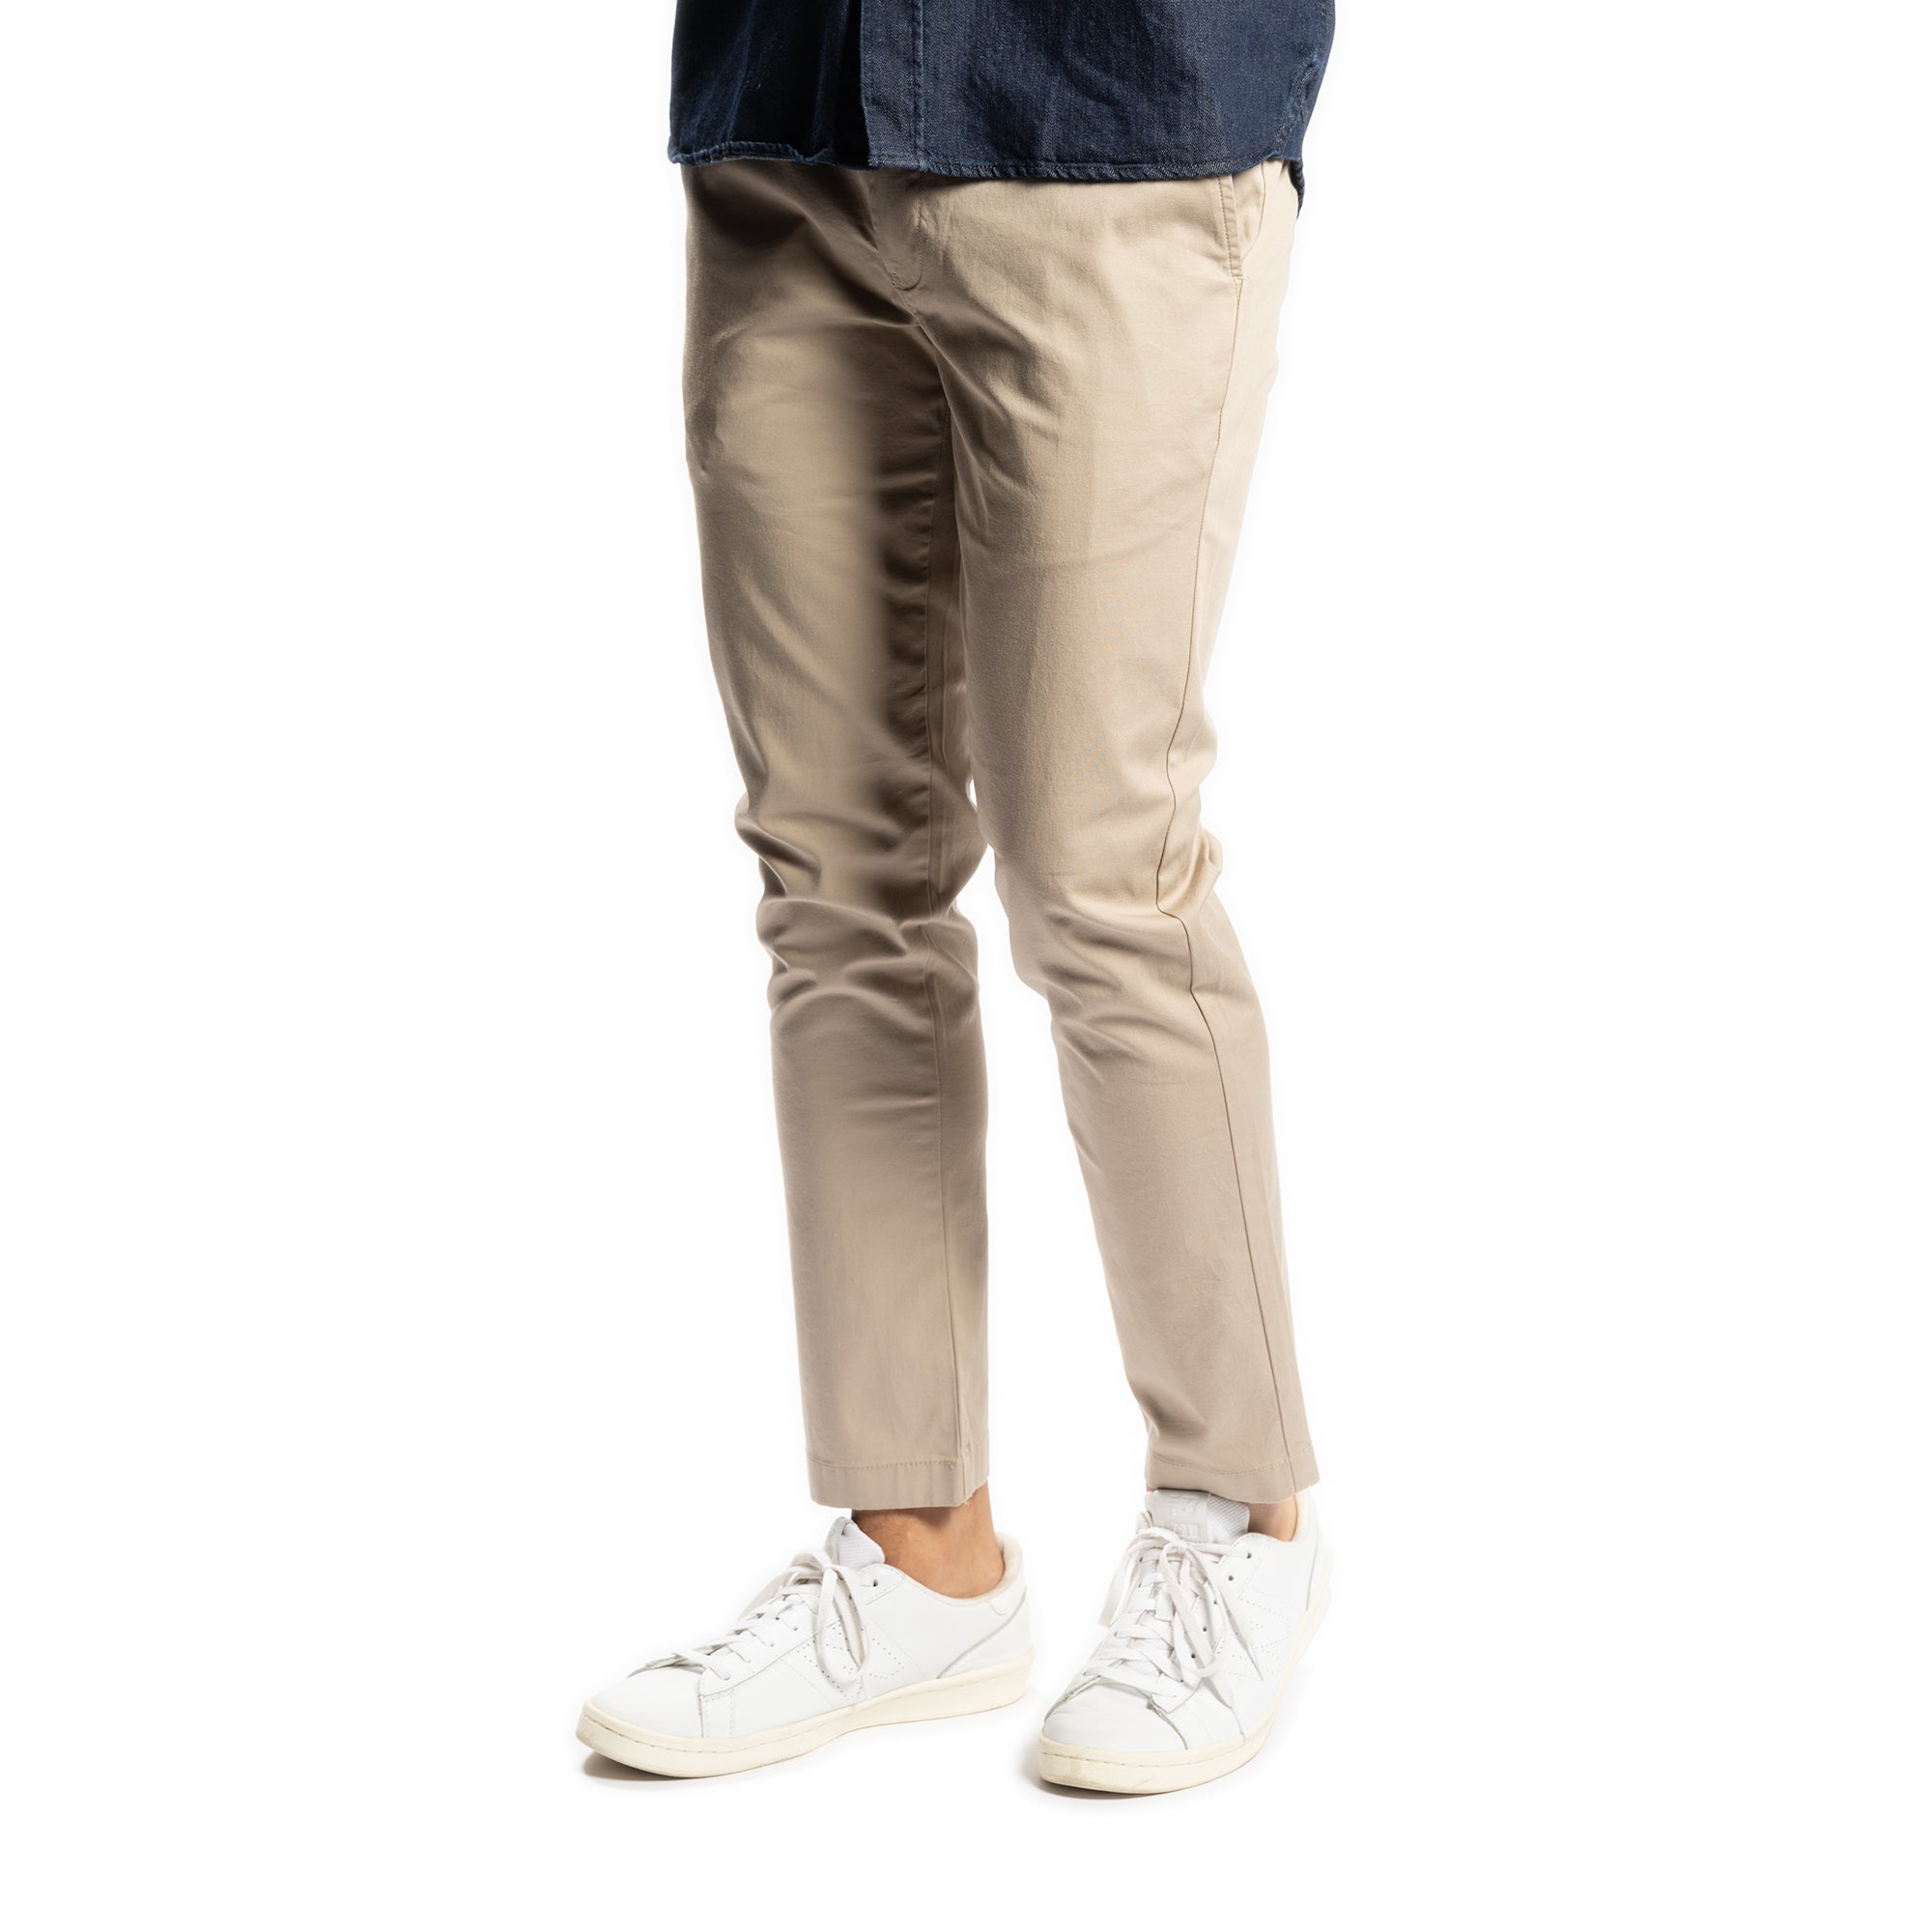 ROCXL Big and tall men's stretch fabric cargo pants in Khaki Brown